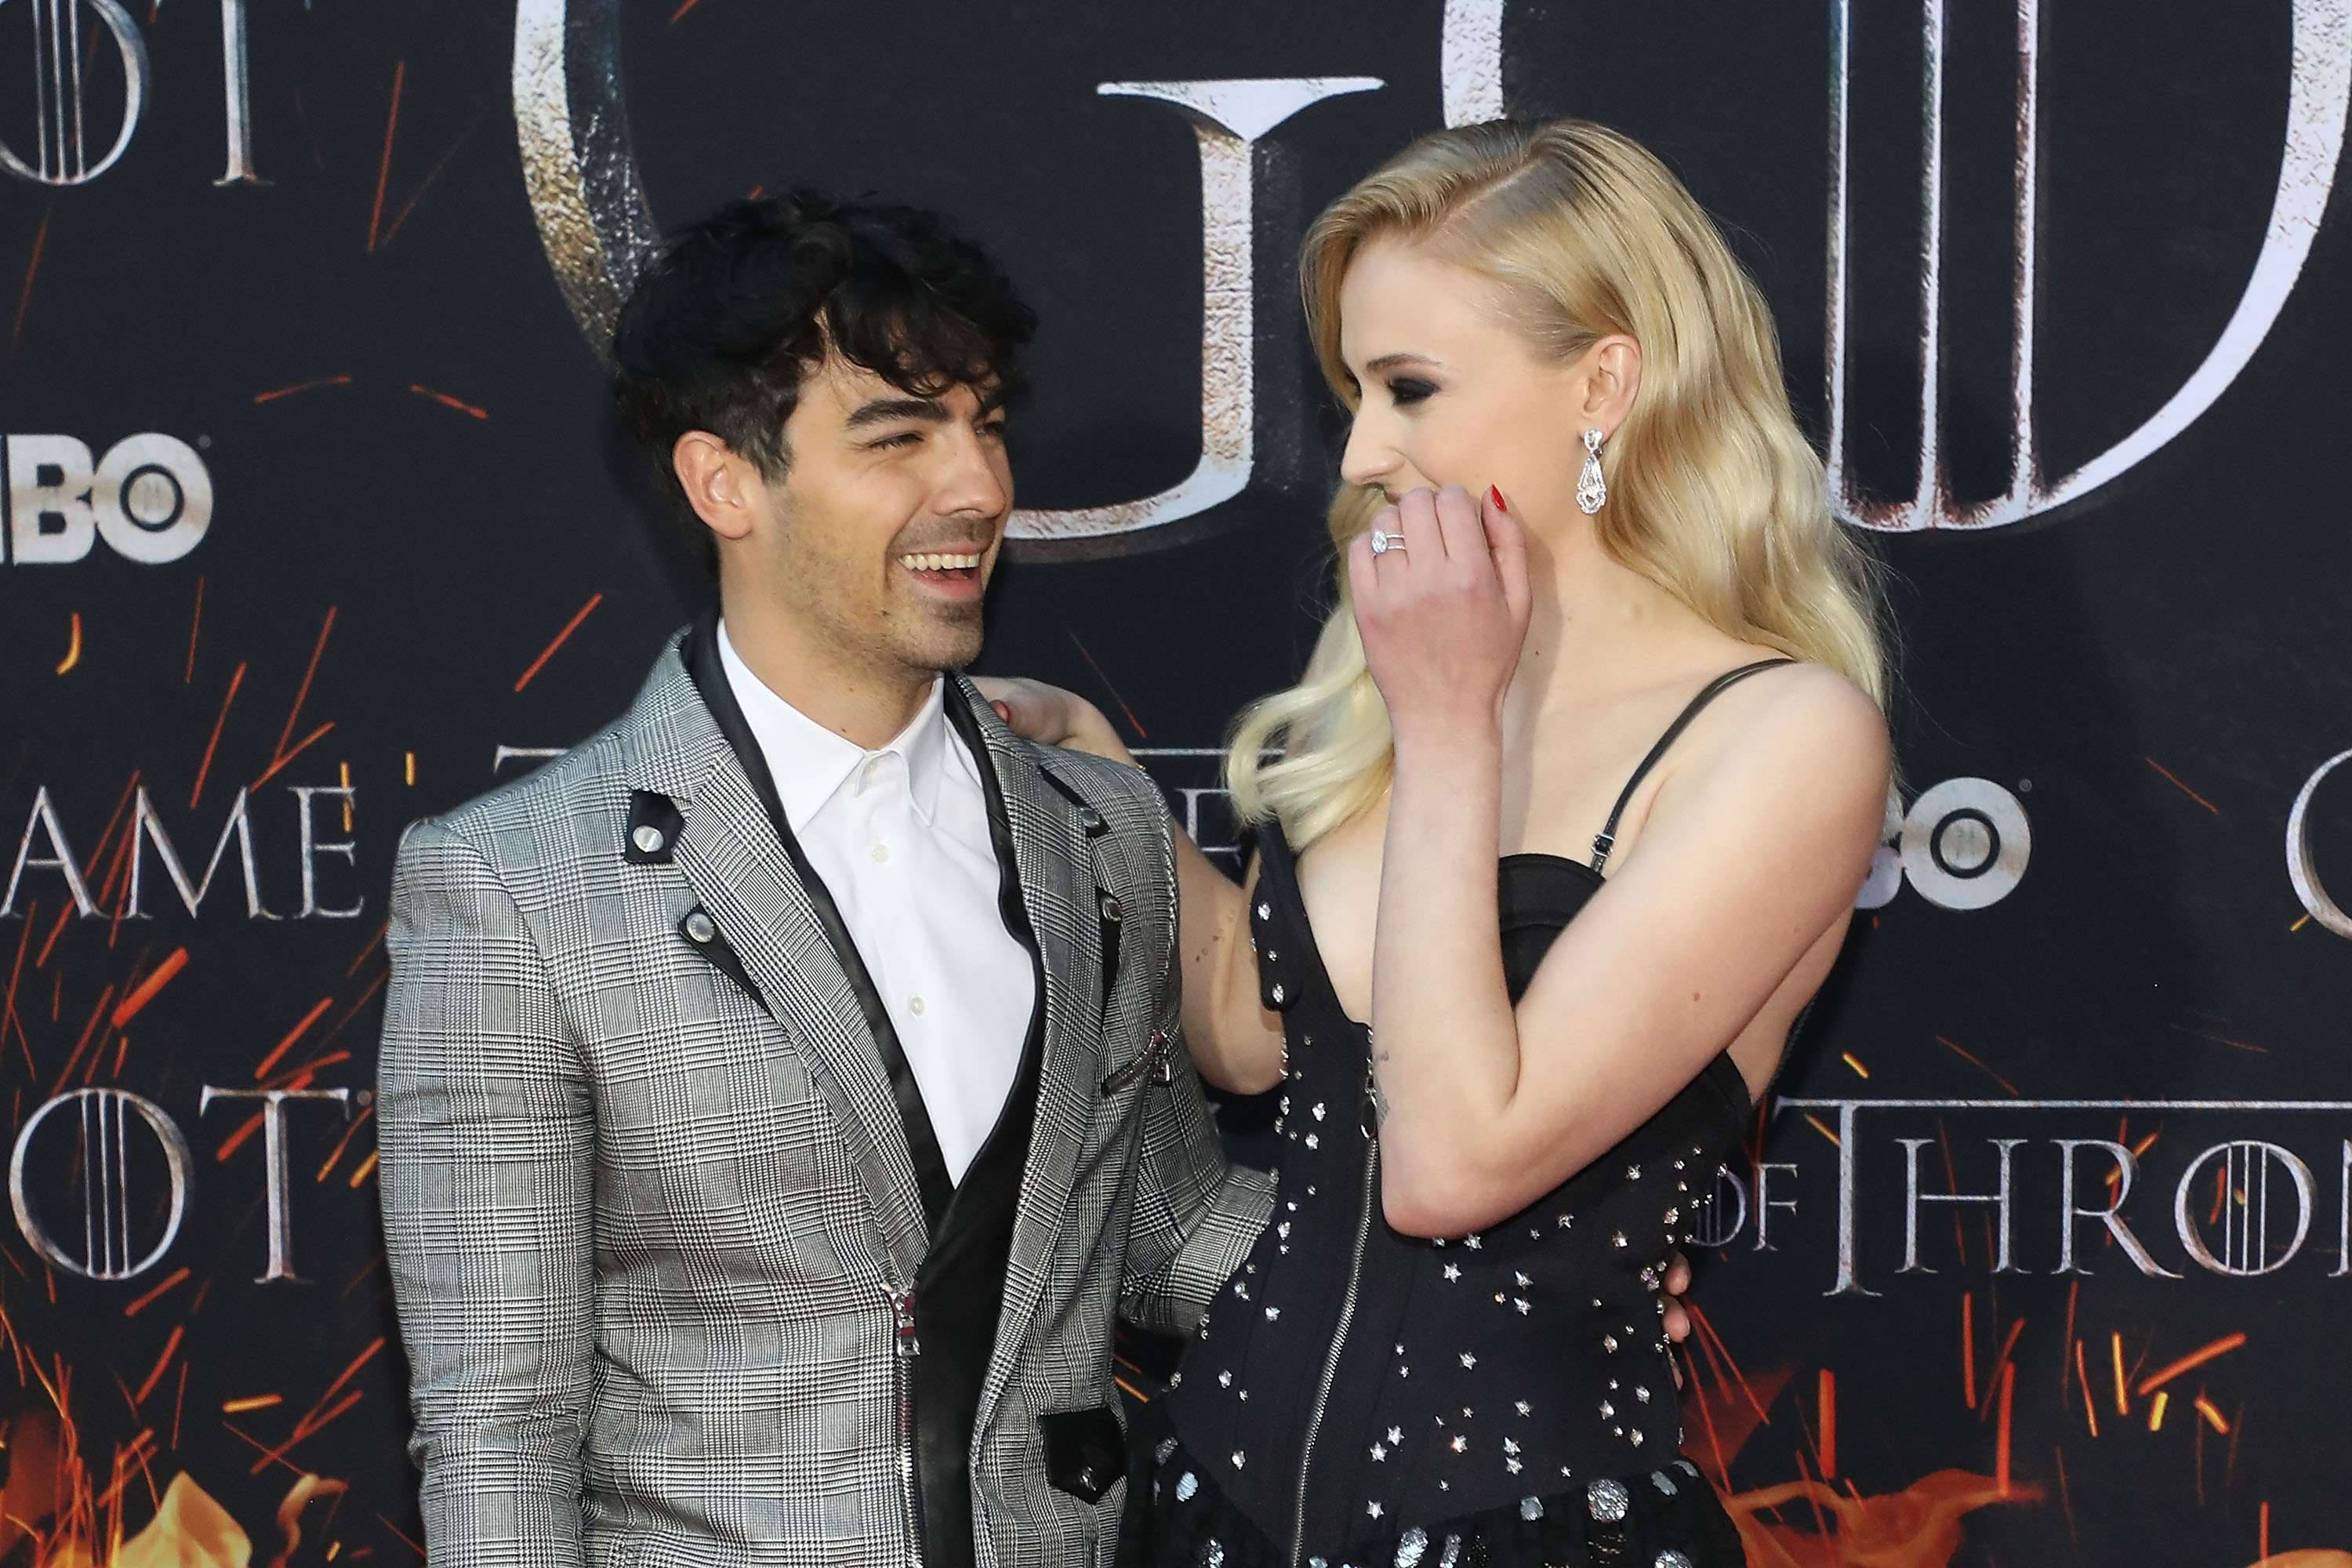 Joe Jonas and Sophie Turner attend the "Game of Thrones" season eight premiere in New York City on April 3, 2019 | Source: Getty Images